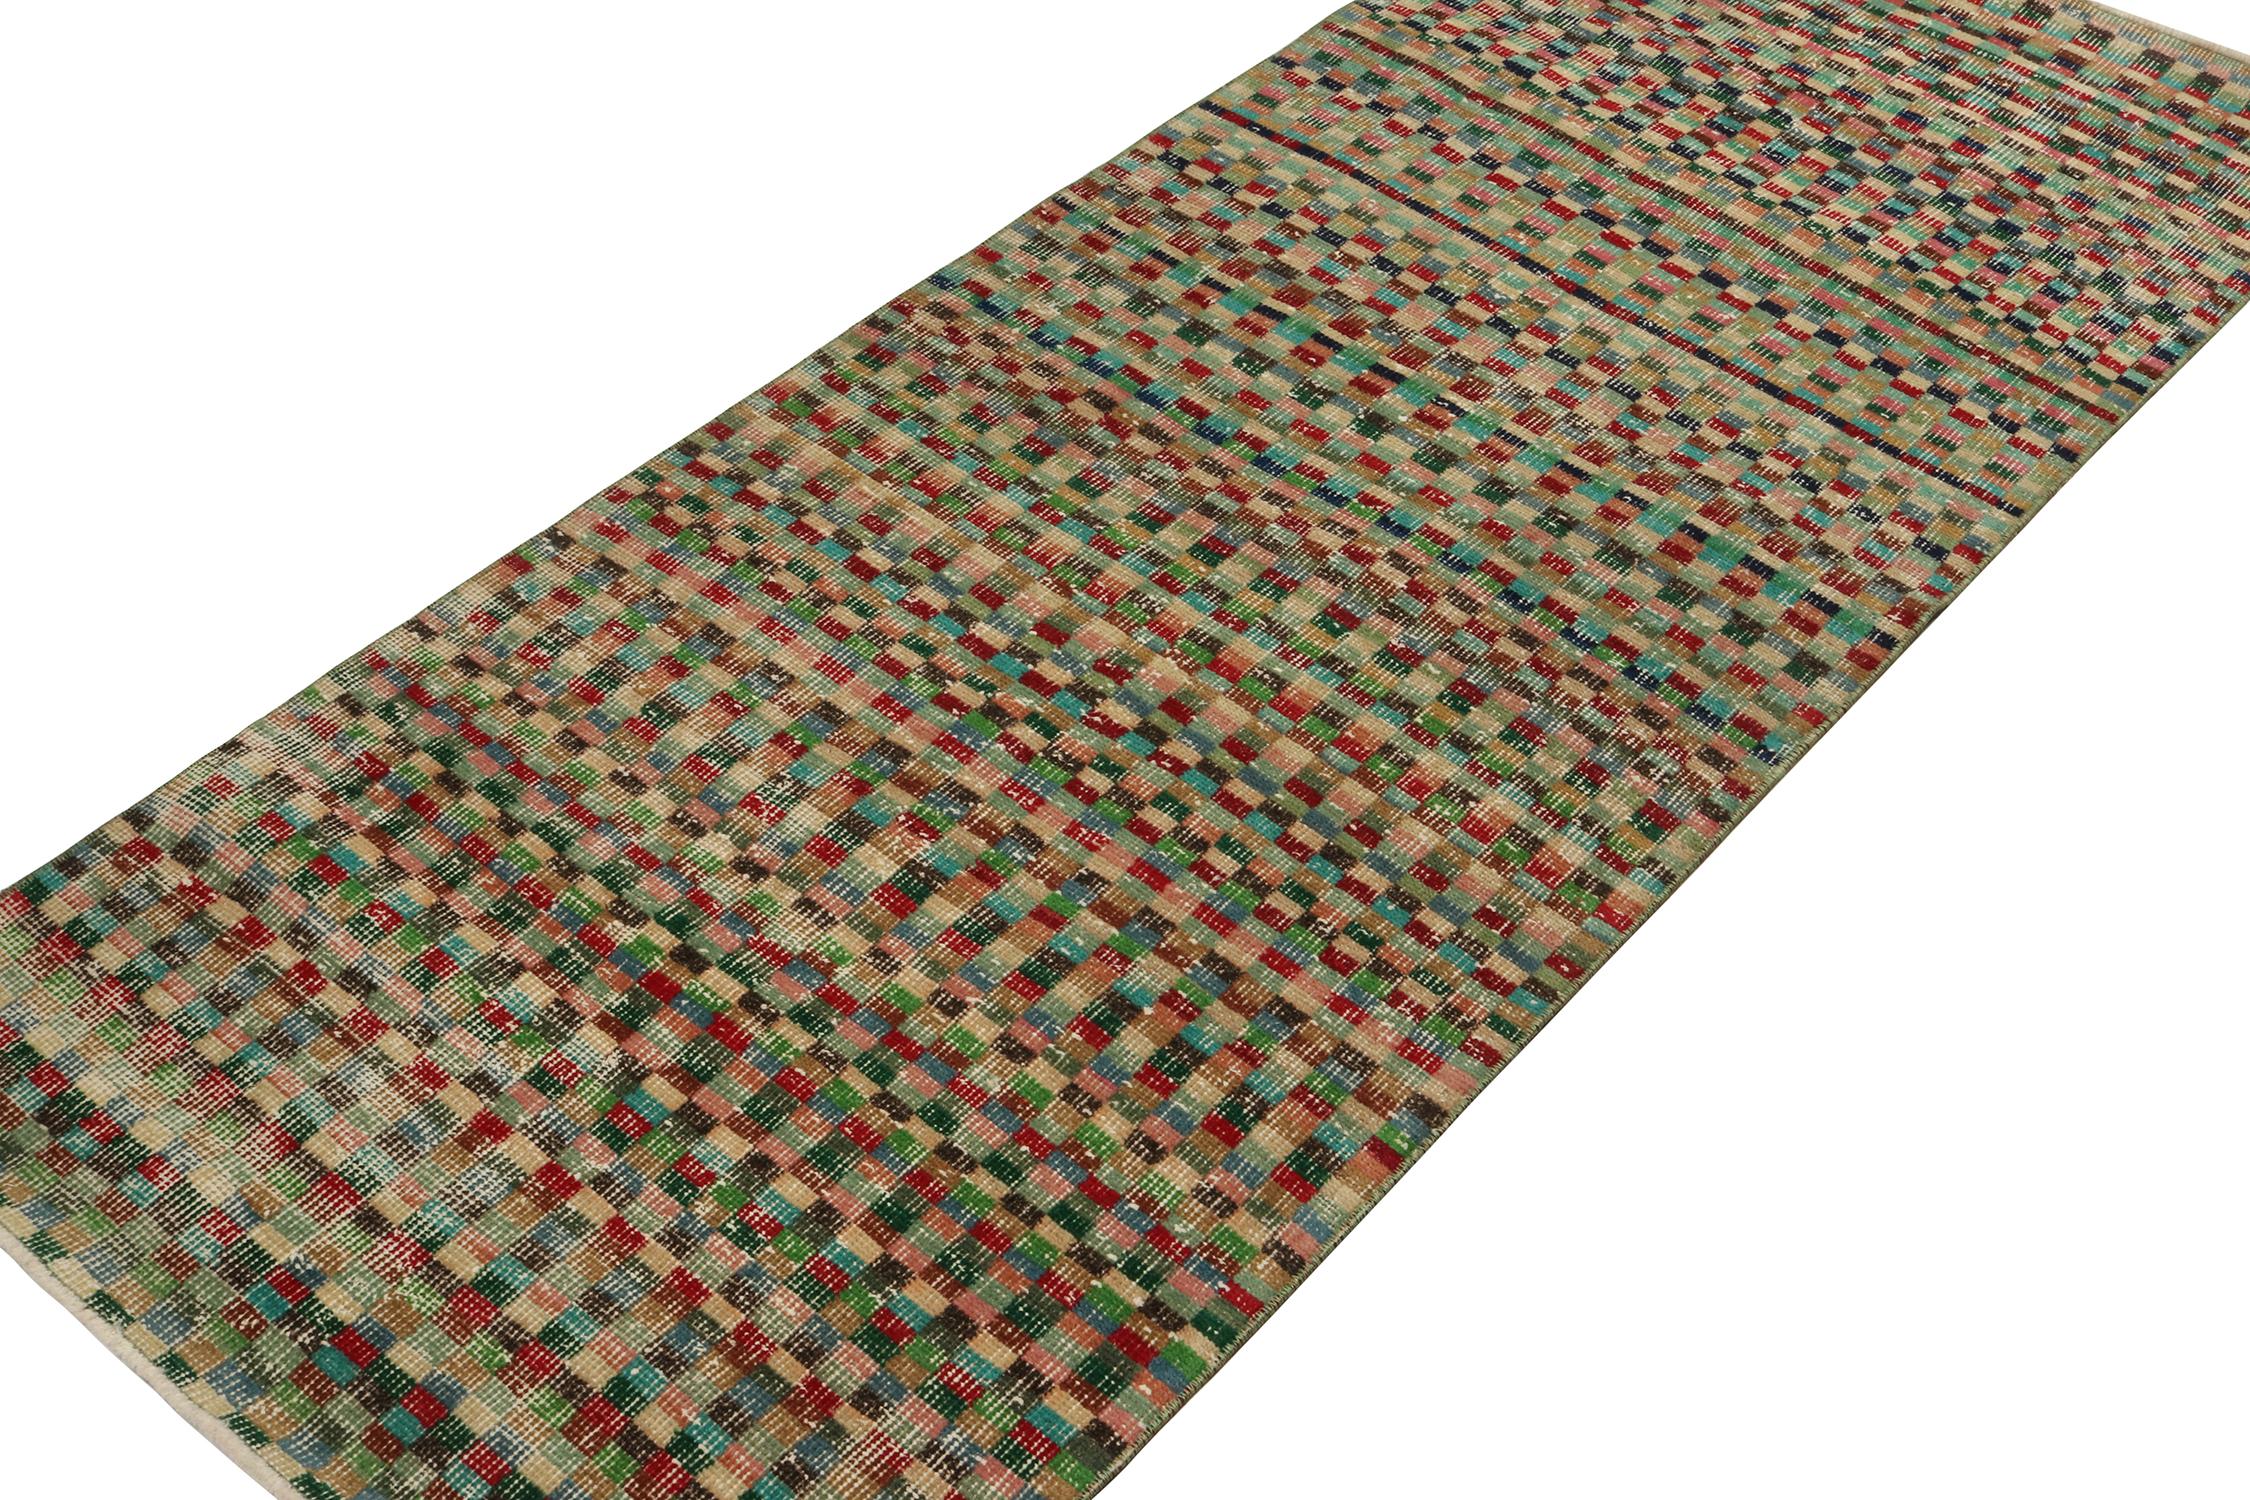 This vintage 3x7 runner is a new addition to Rug & Kilim’s Mid-Century Pasha Collection. This line is a commemoration, with rare curations we believe to hail from multidisciplinary Turkish designer Zeki Müren.

Further on the Design:

This